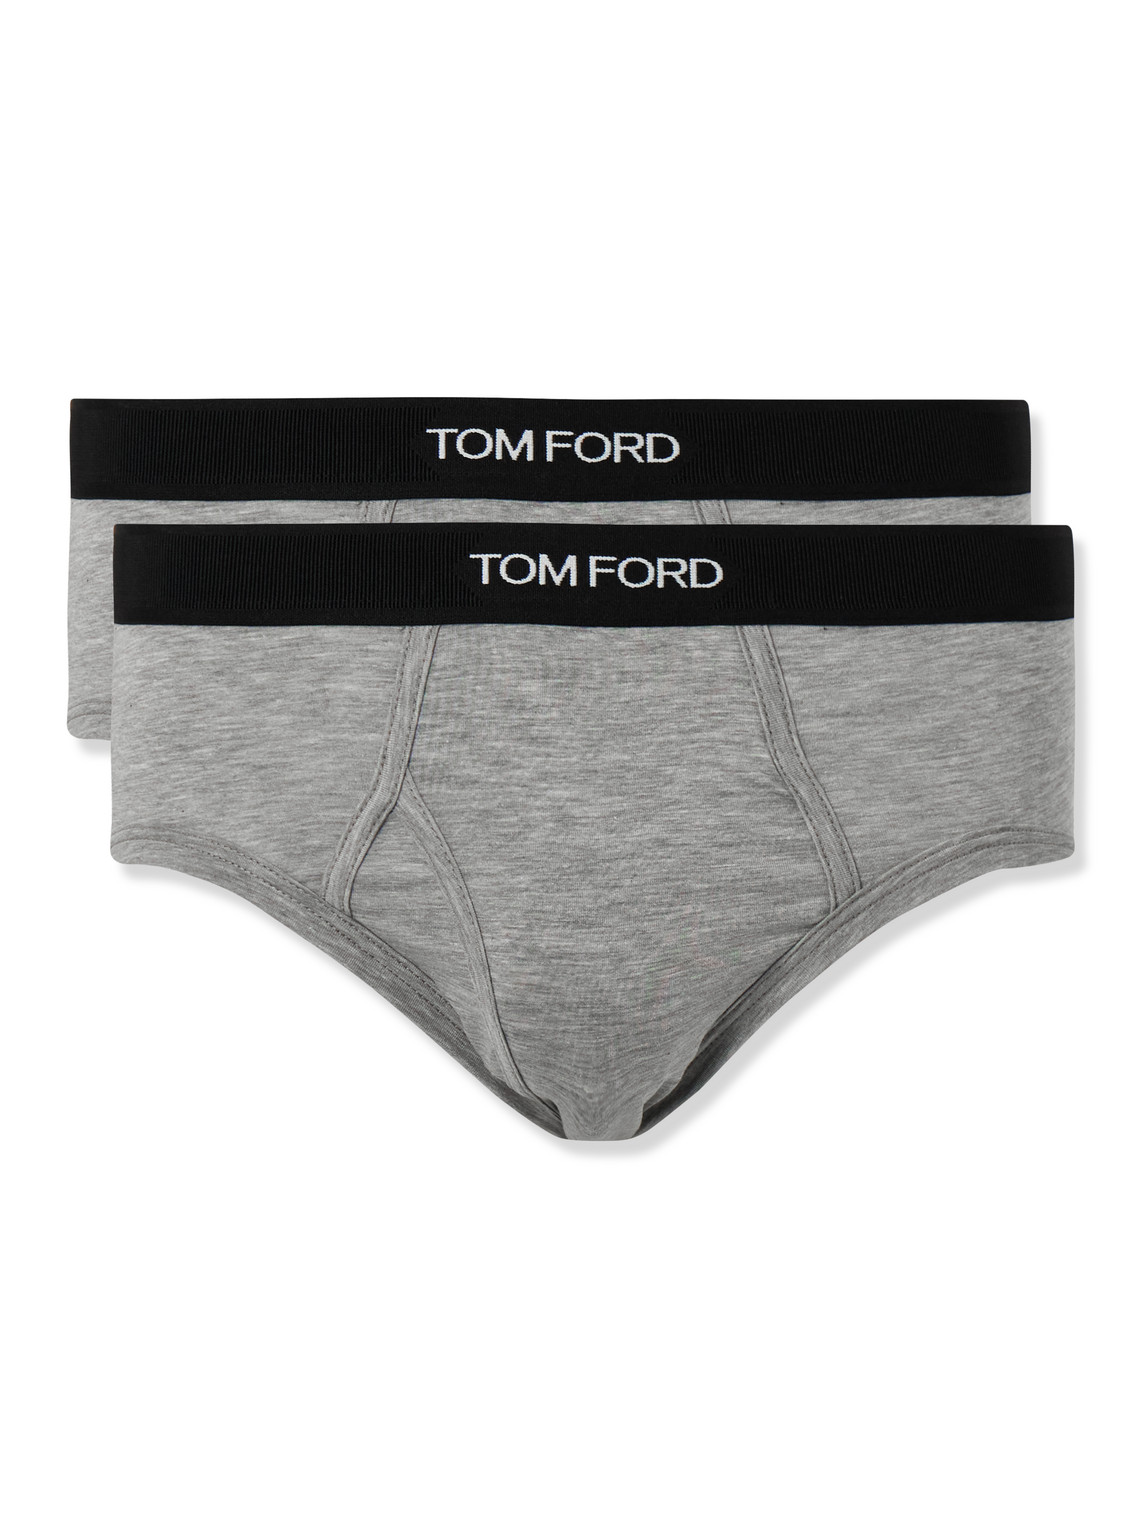 TOM FORD - Two-Pack Stretch-Cotton and Modal-Blend Briefs - Men - Gray - XL von TOM FORD